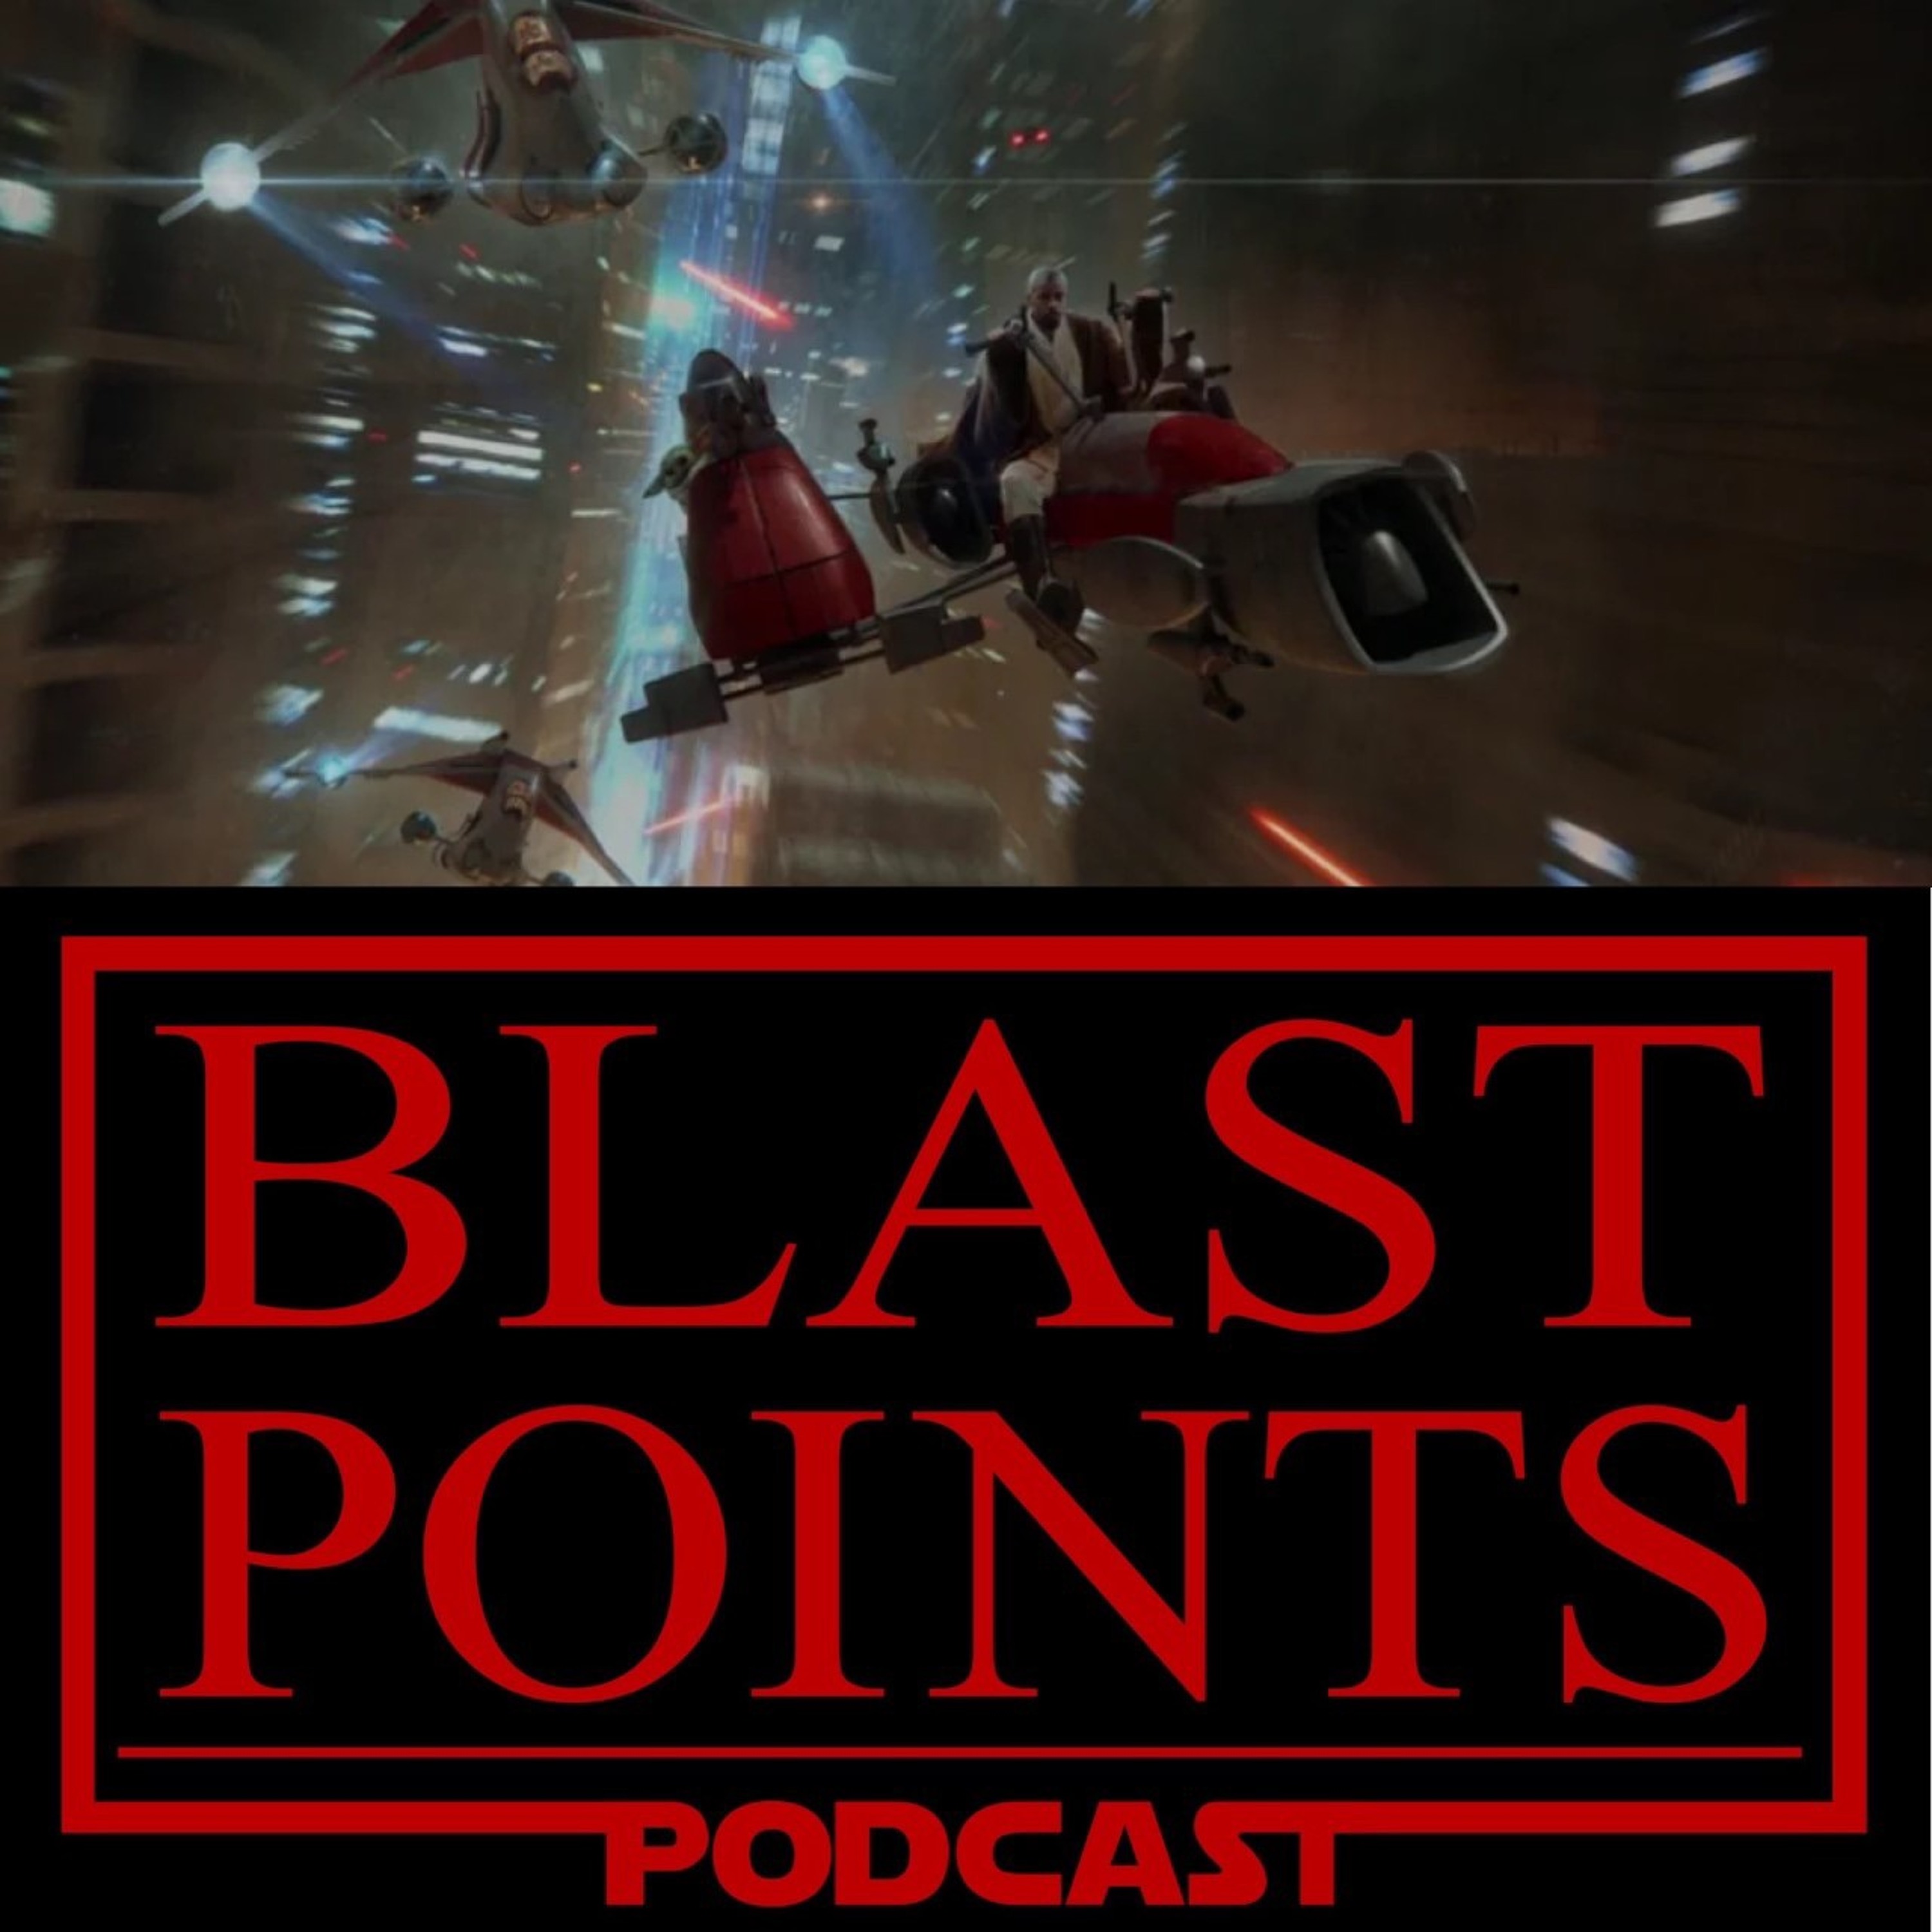 Episode 350 - The Mandalorian Chapter 20 - ”The Foundling” Freakout